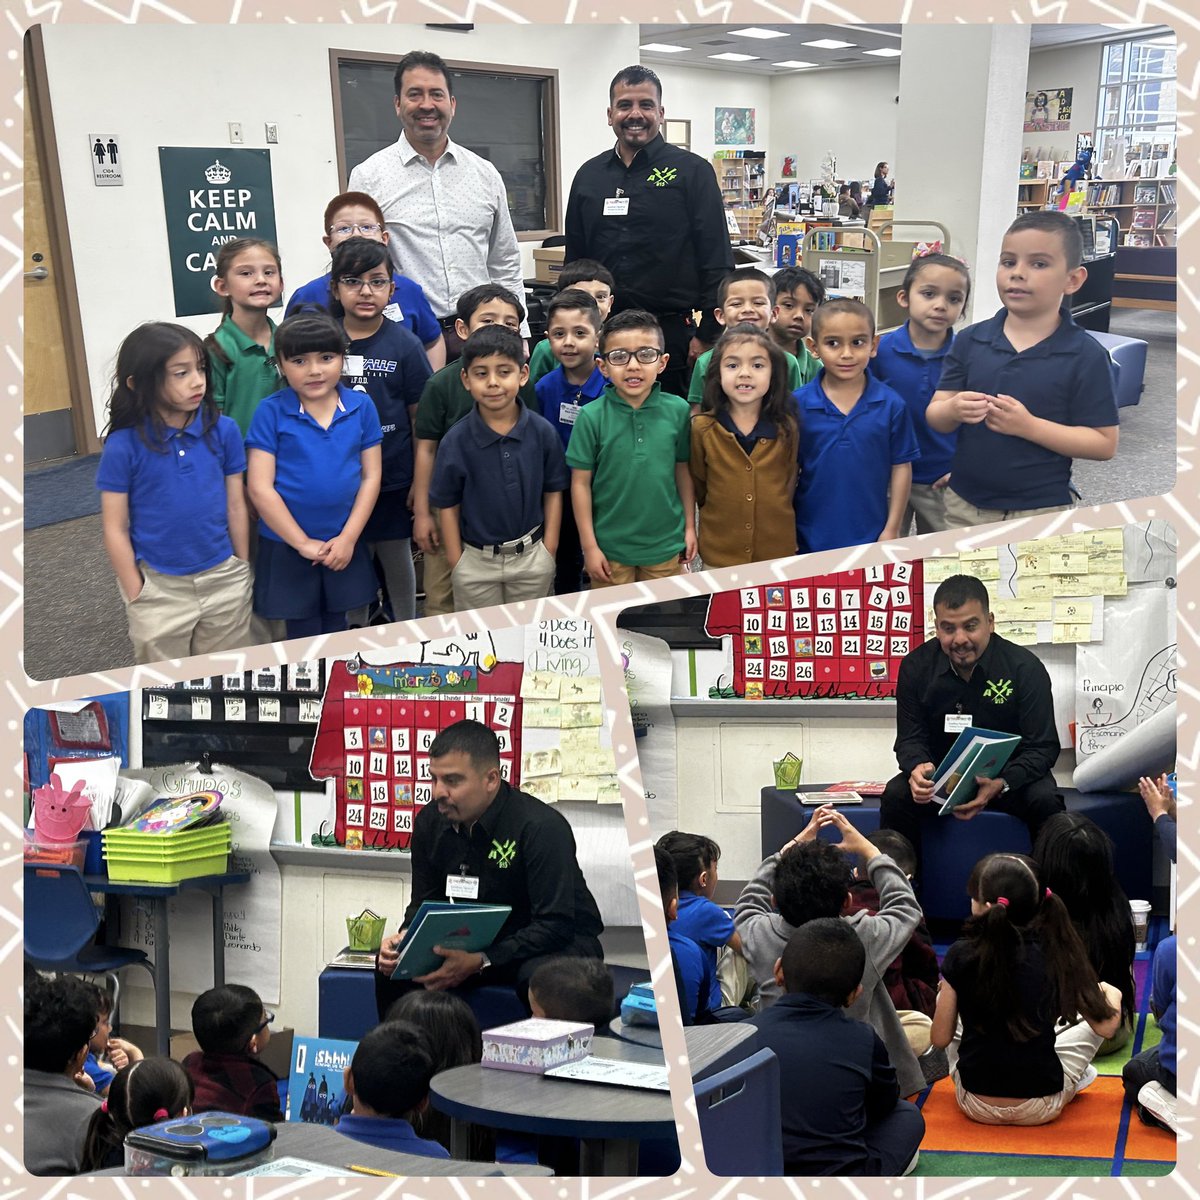 Our @DelValleES_YISD Principal for the Day was Mr. Jonathan Figueroa, owner of Culebra Electric, thank you for visiting our school and read to our student! #THEDISTRICT #WeDeliverExcellence @maritza08OFOD @NAstorga_APMME @oceans80 @tippih833